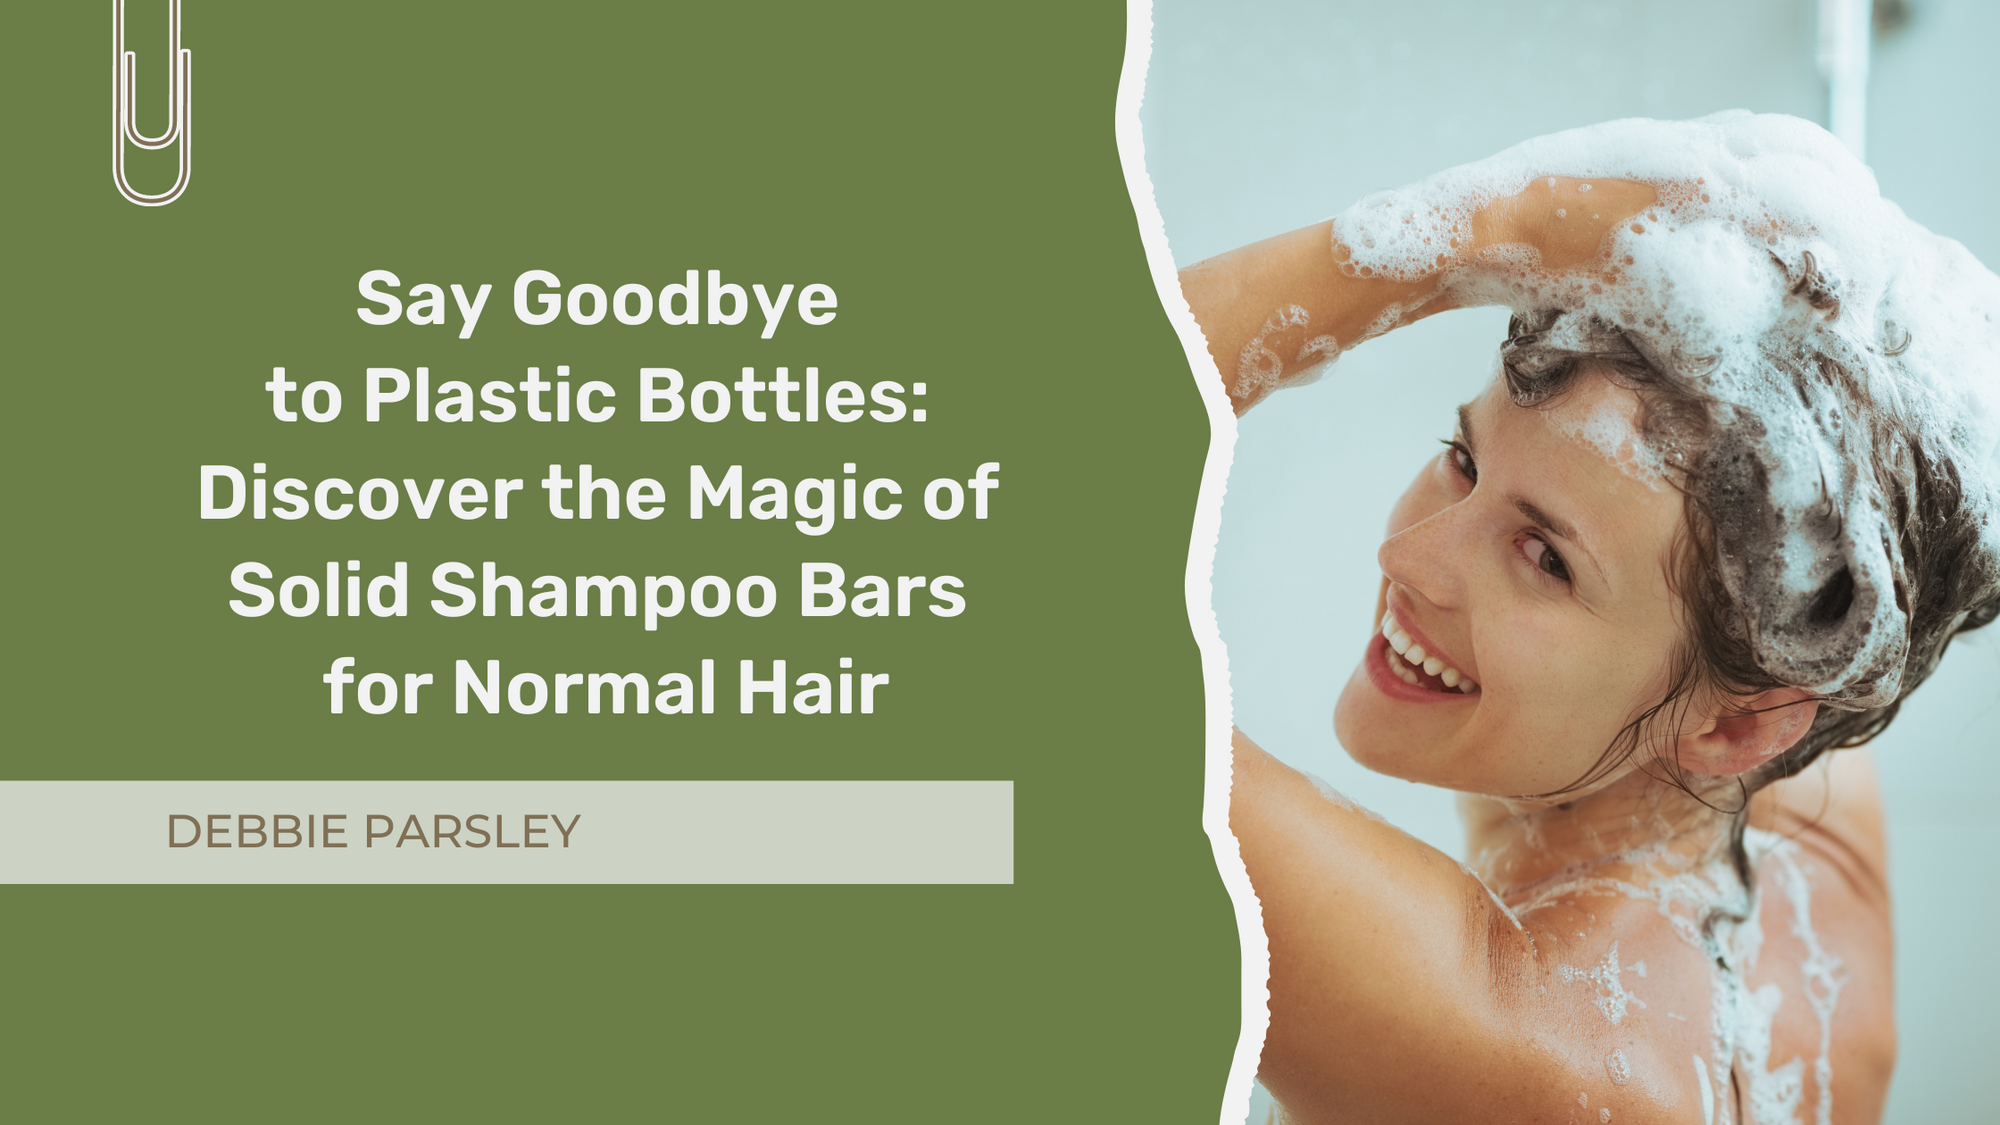 Photo of woman shampooing her hair with caption "Say Goodbye to Plastic Bottles: Discover the Magic of Solid Shampoo Bars for Normal Hair"